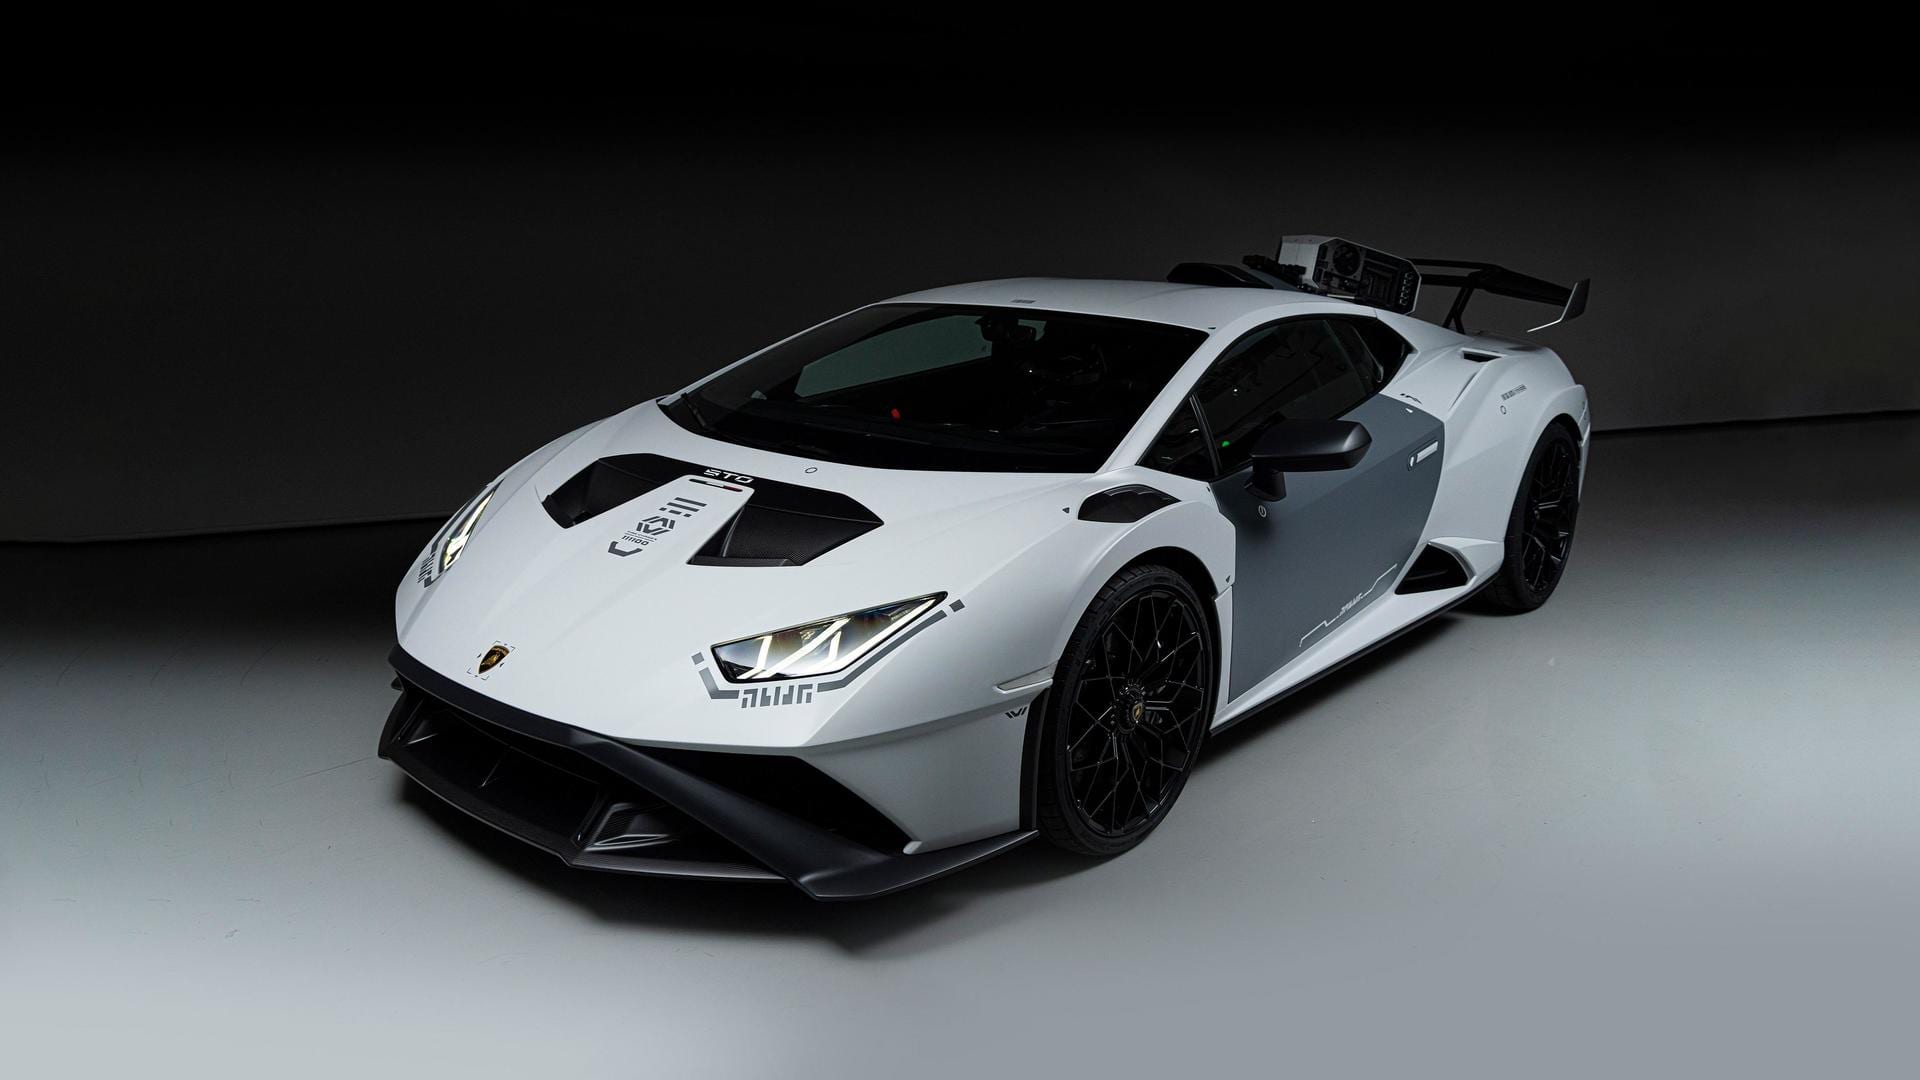 Lamborghini Huracan STO Time Chaser_111100 breaks cover as one-off supercar